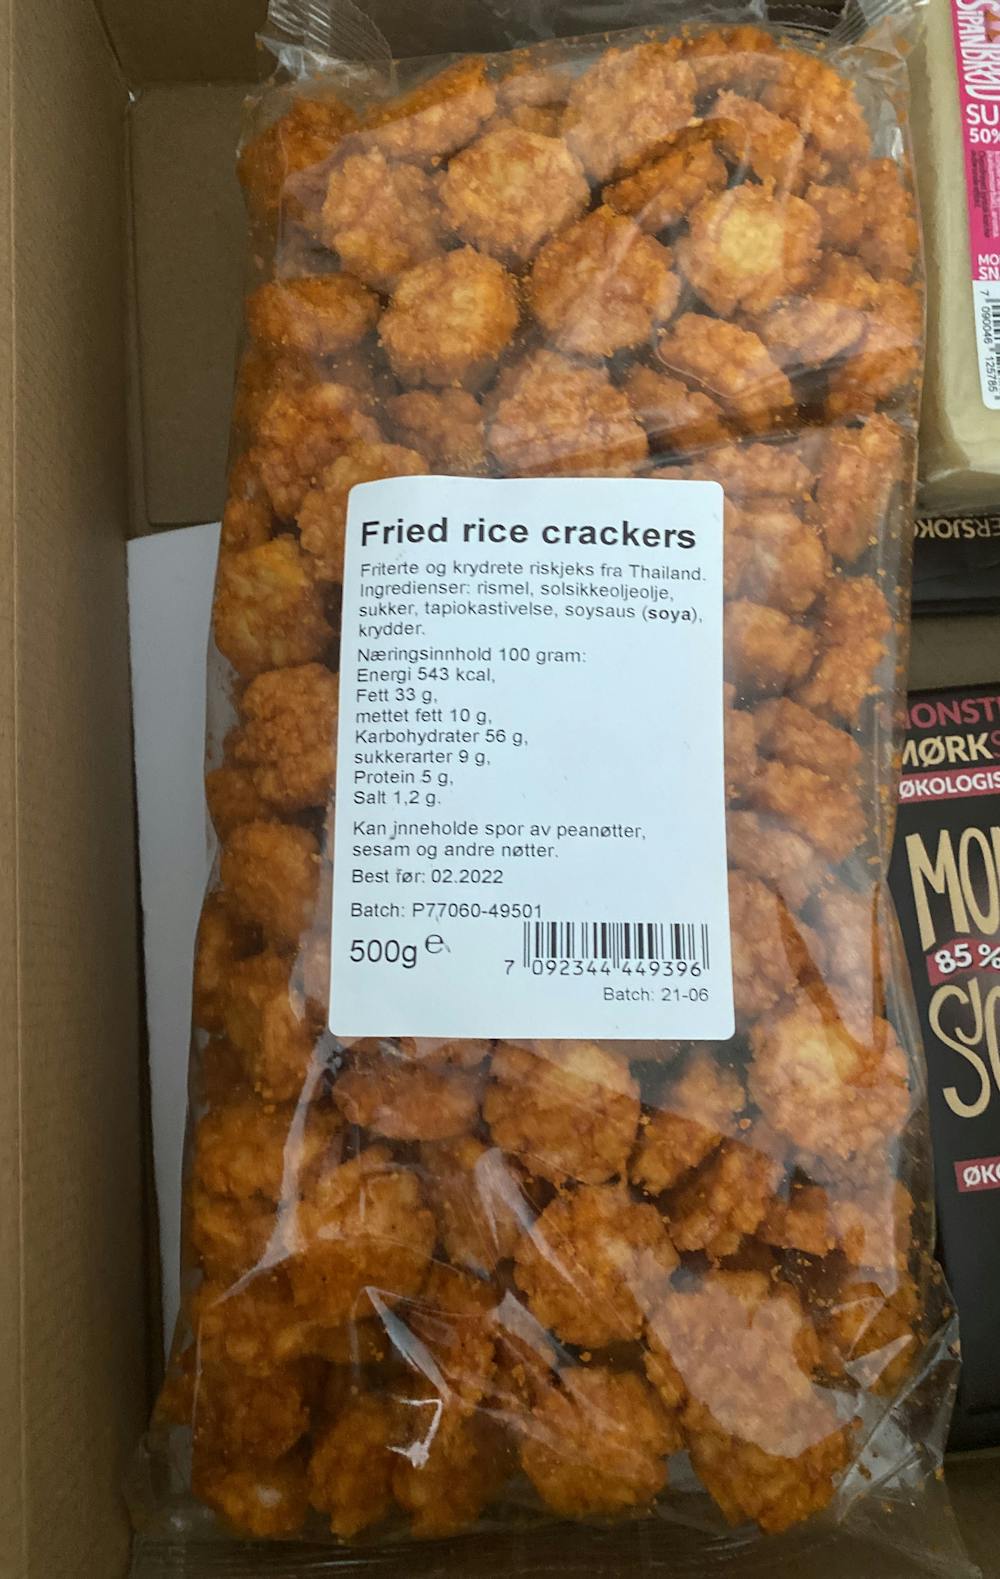 Fried rice crackers